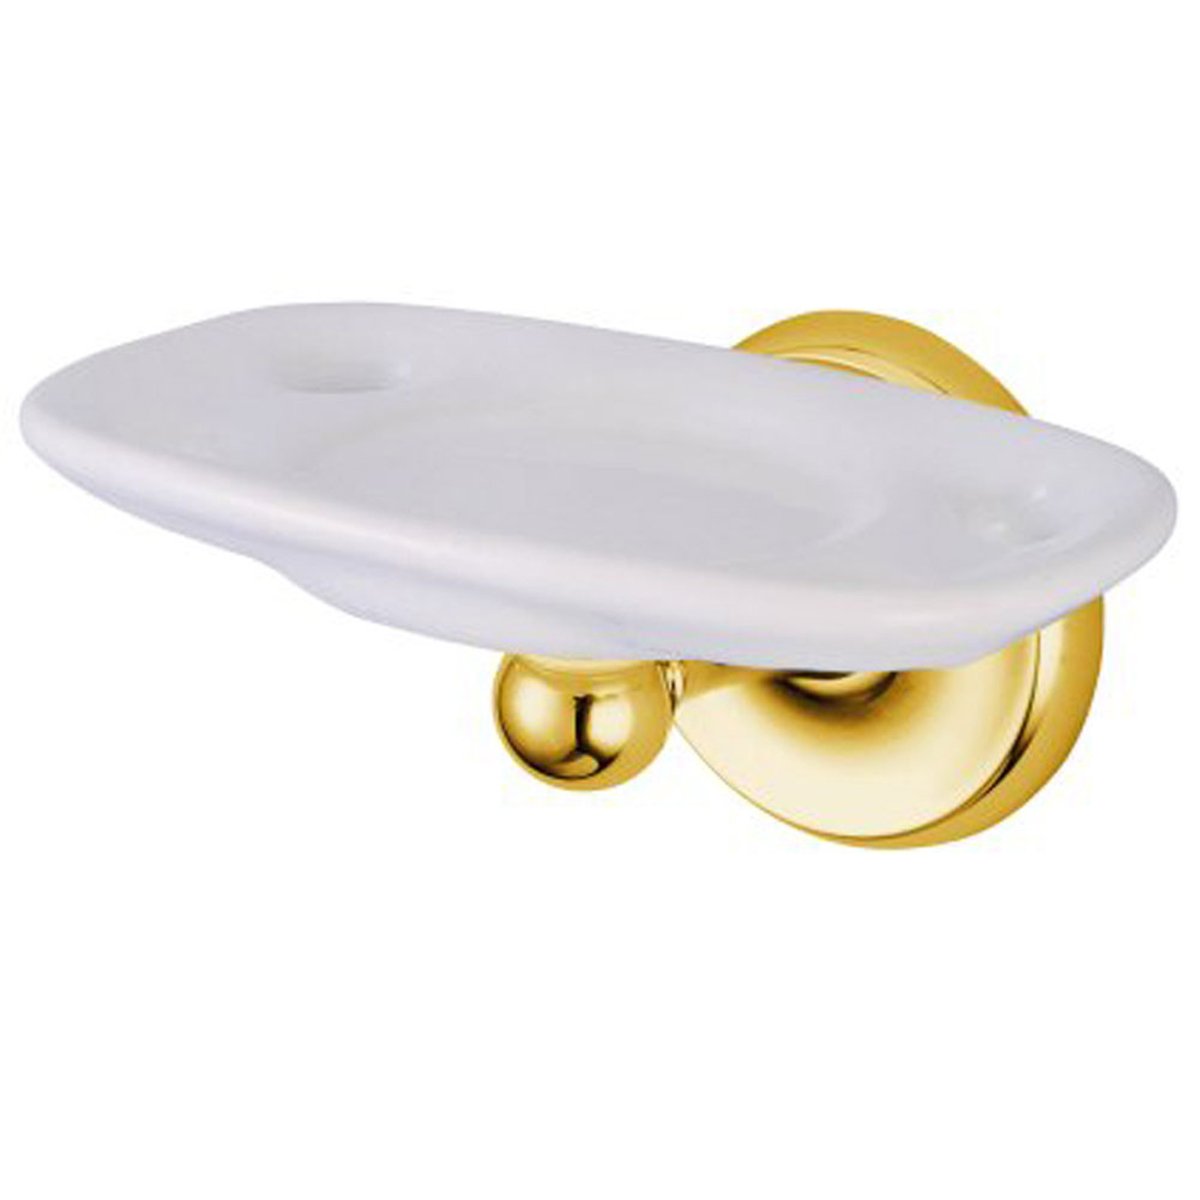 Kingston Brass Classic Wall Mount Toothbrush and Tumbler Holder-Bathroom Accessories-Free Shipping-Directsinks.